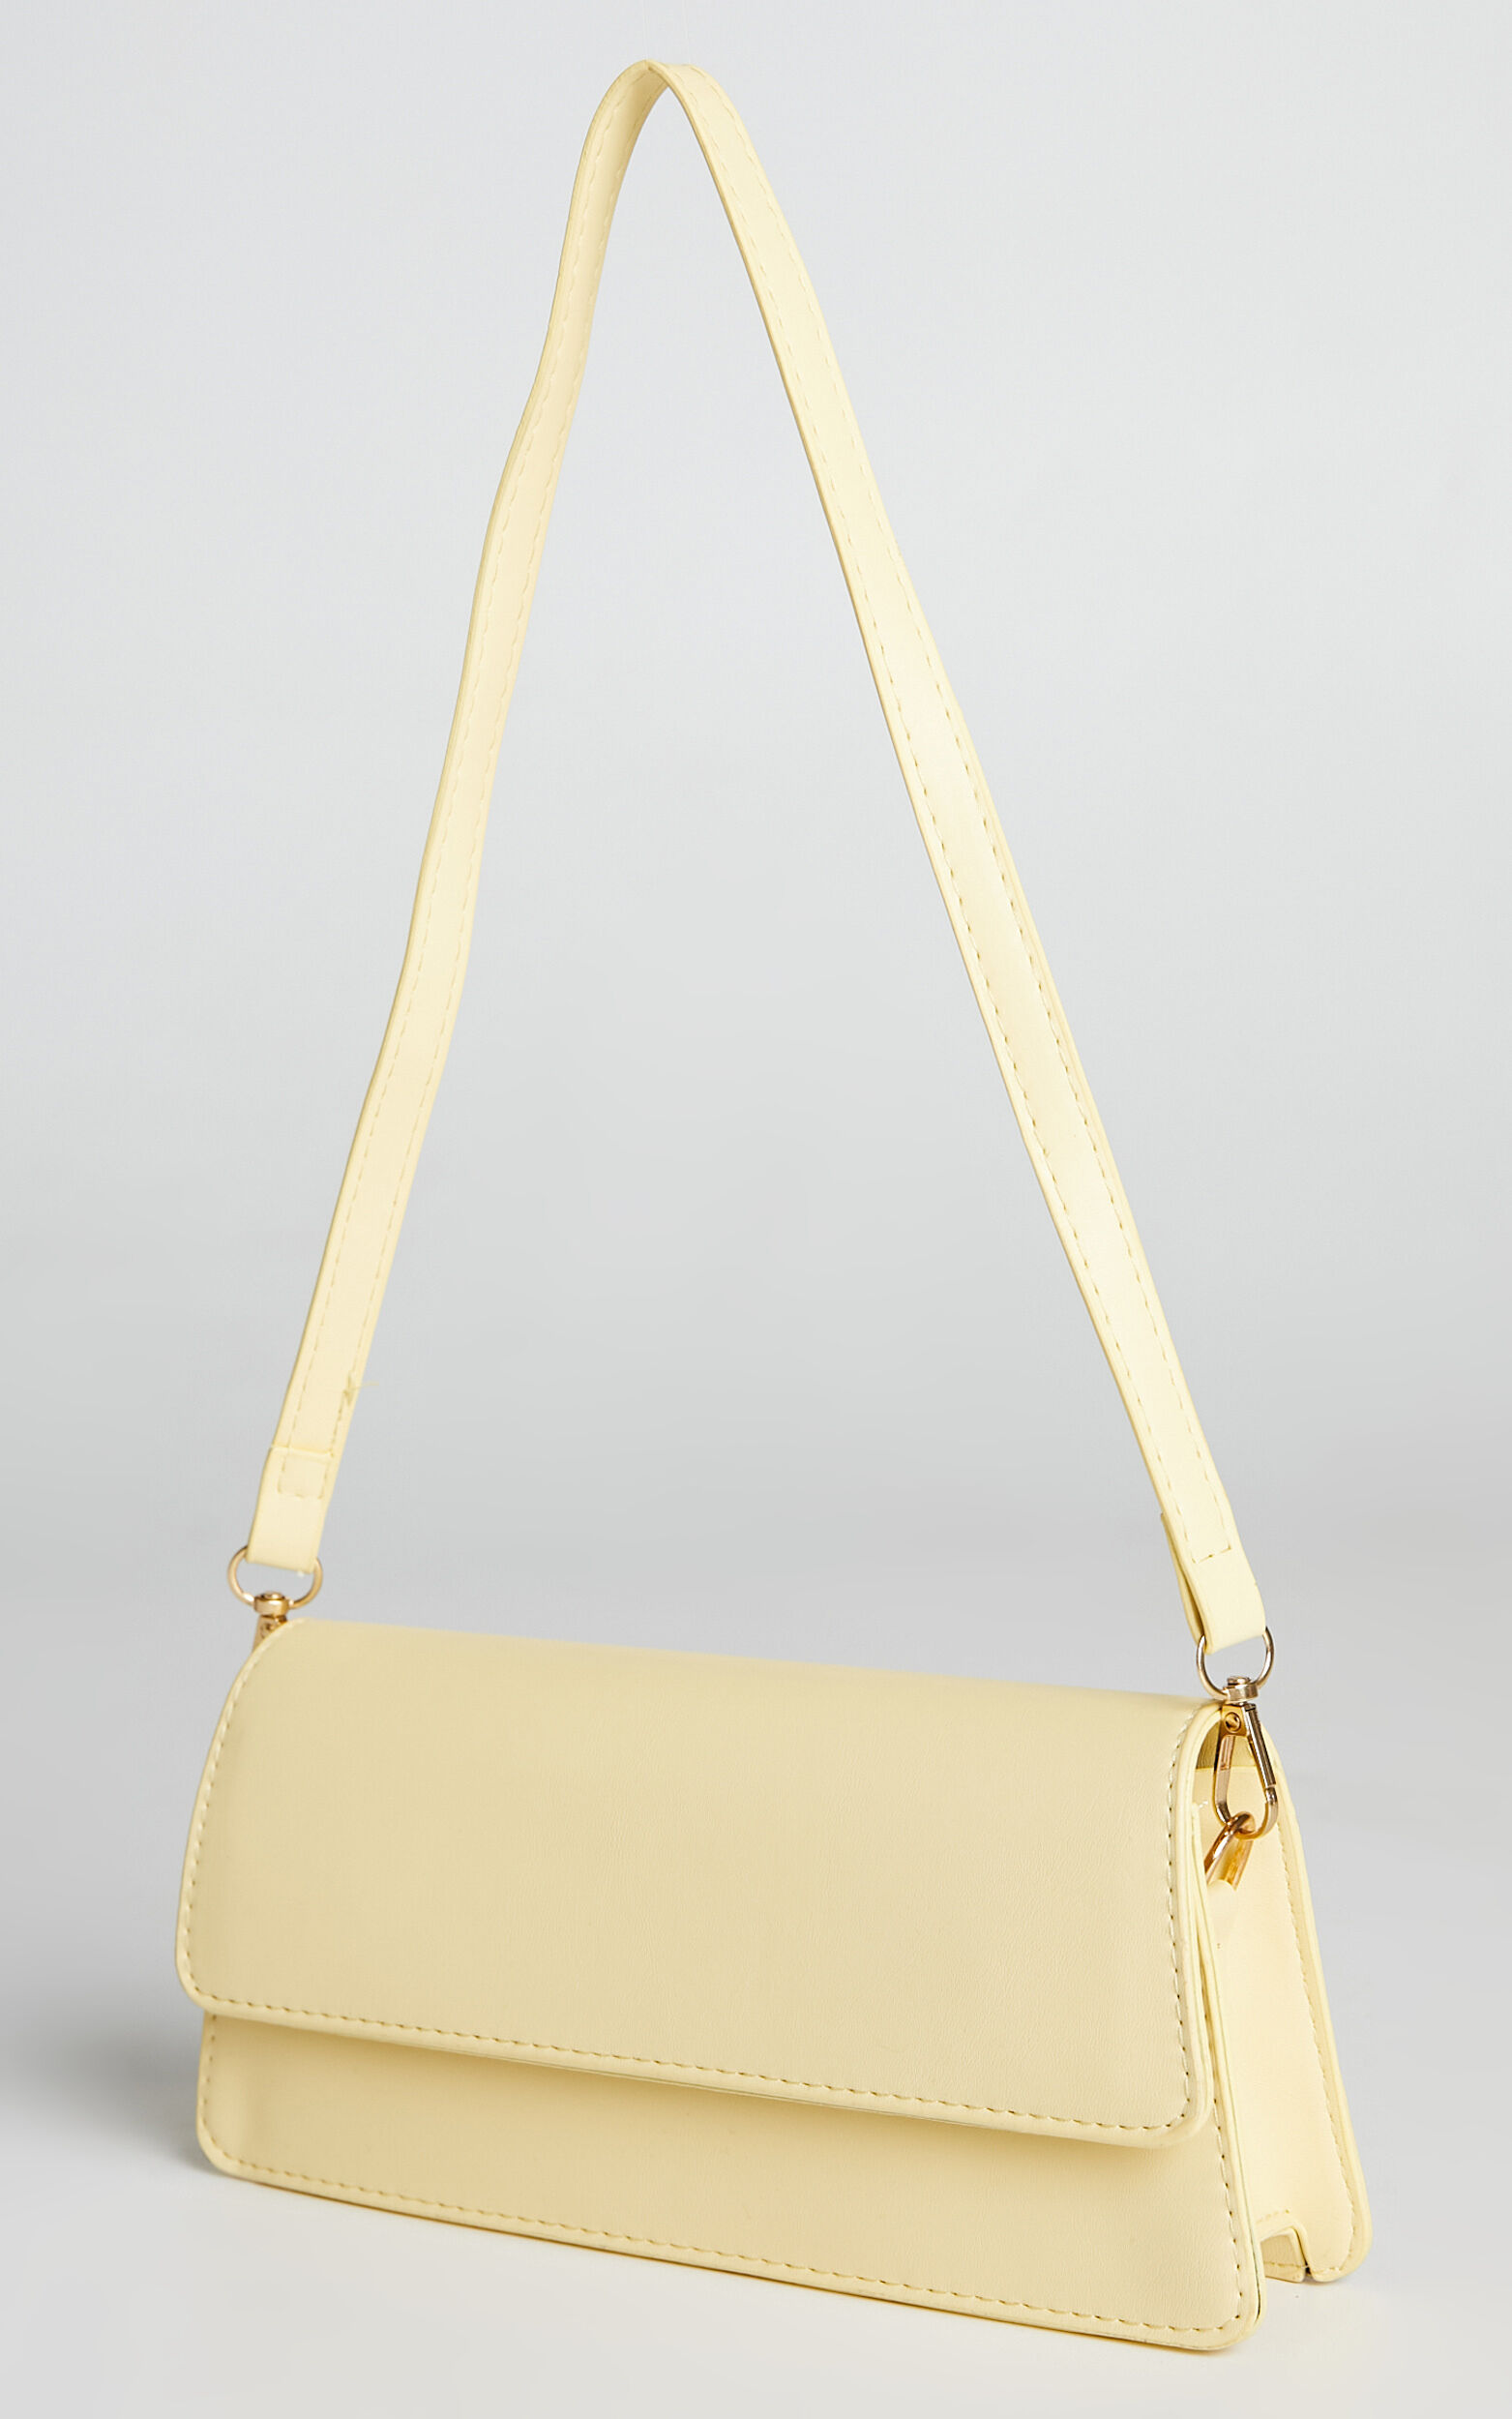 Pip Crossbody Bag in Pastel Yellow - NoSize, YEL1, super-hi-res image number null